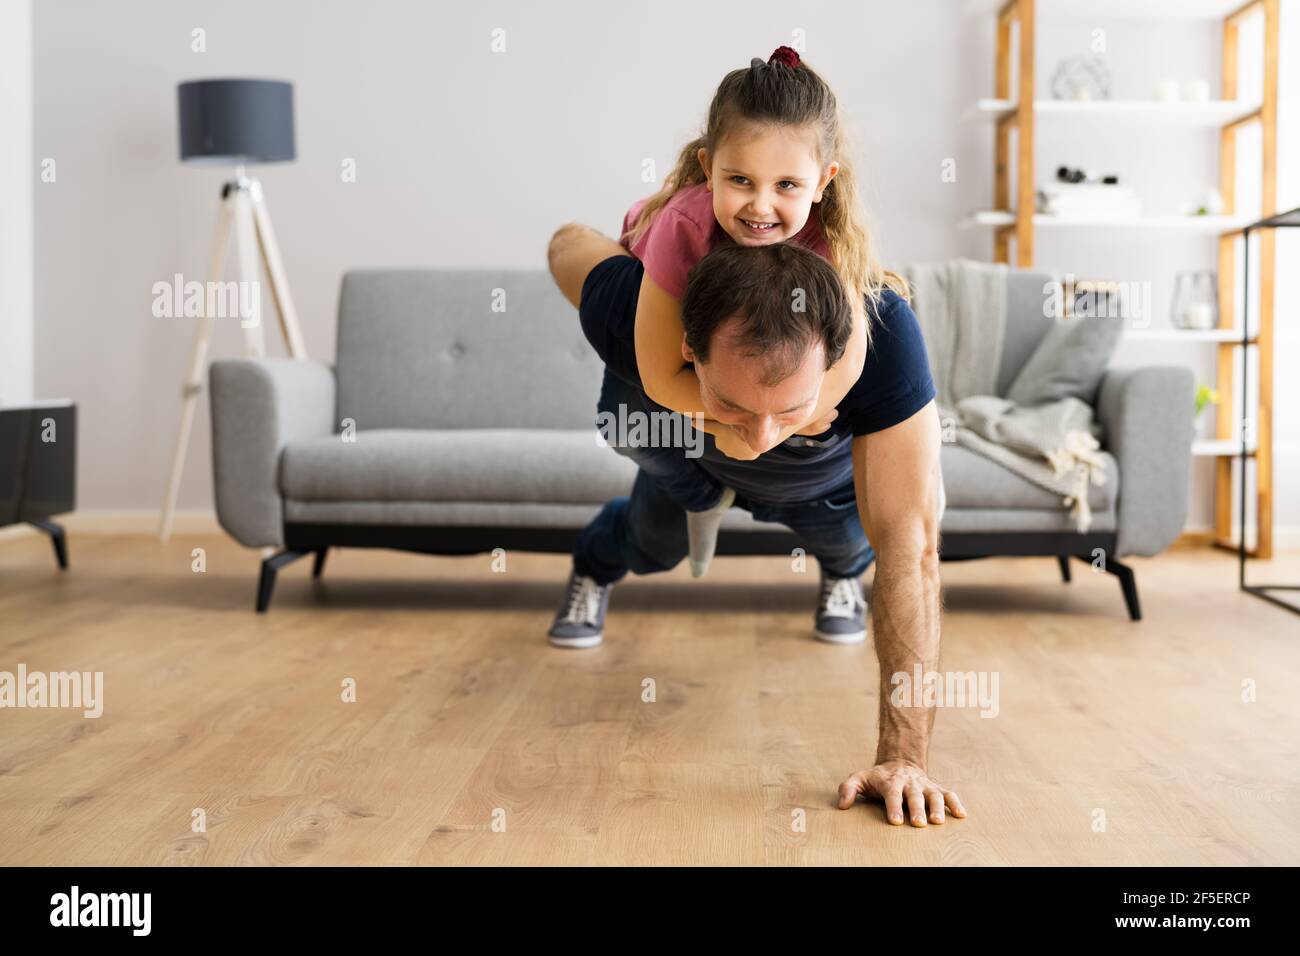 Happy Family With Child Fitness Training Exercise Stock Photo